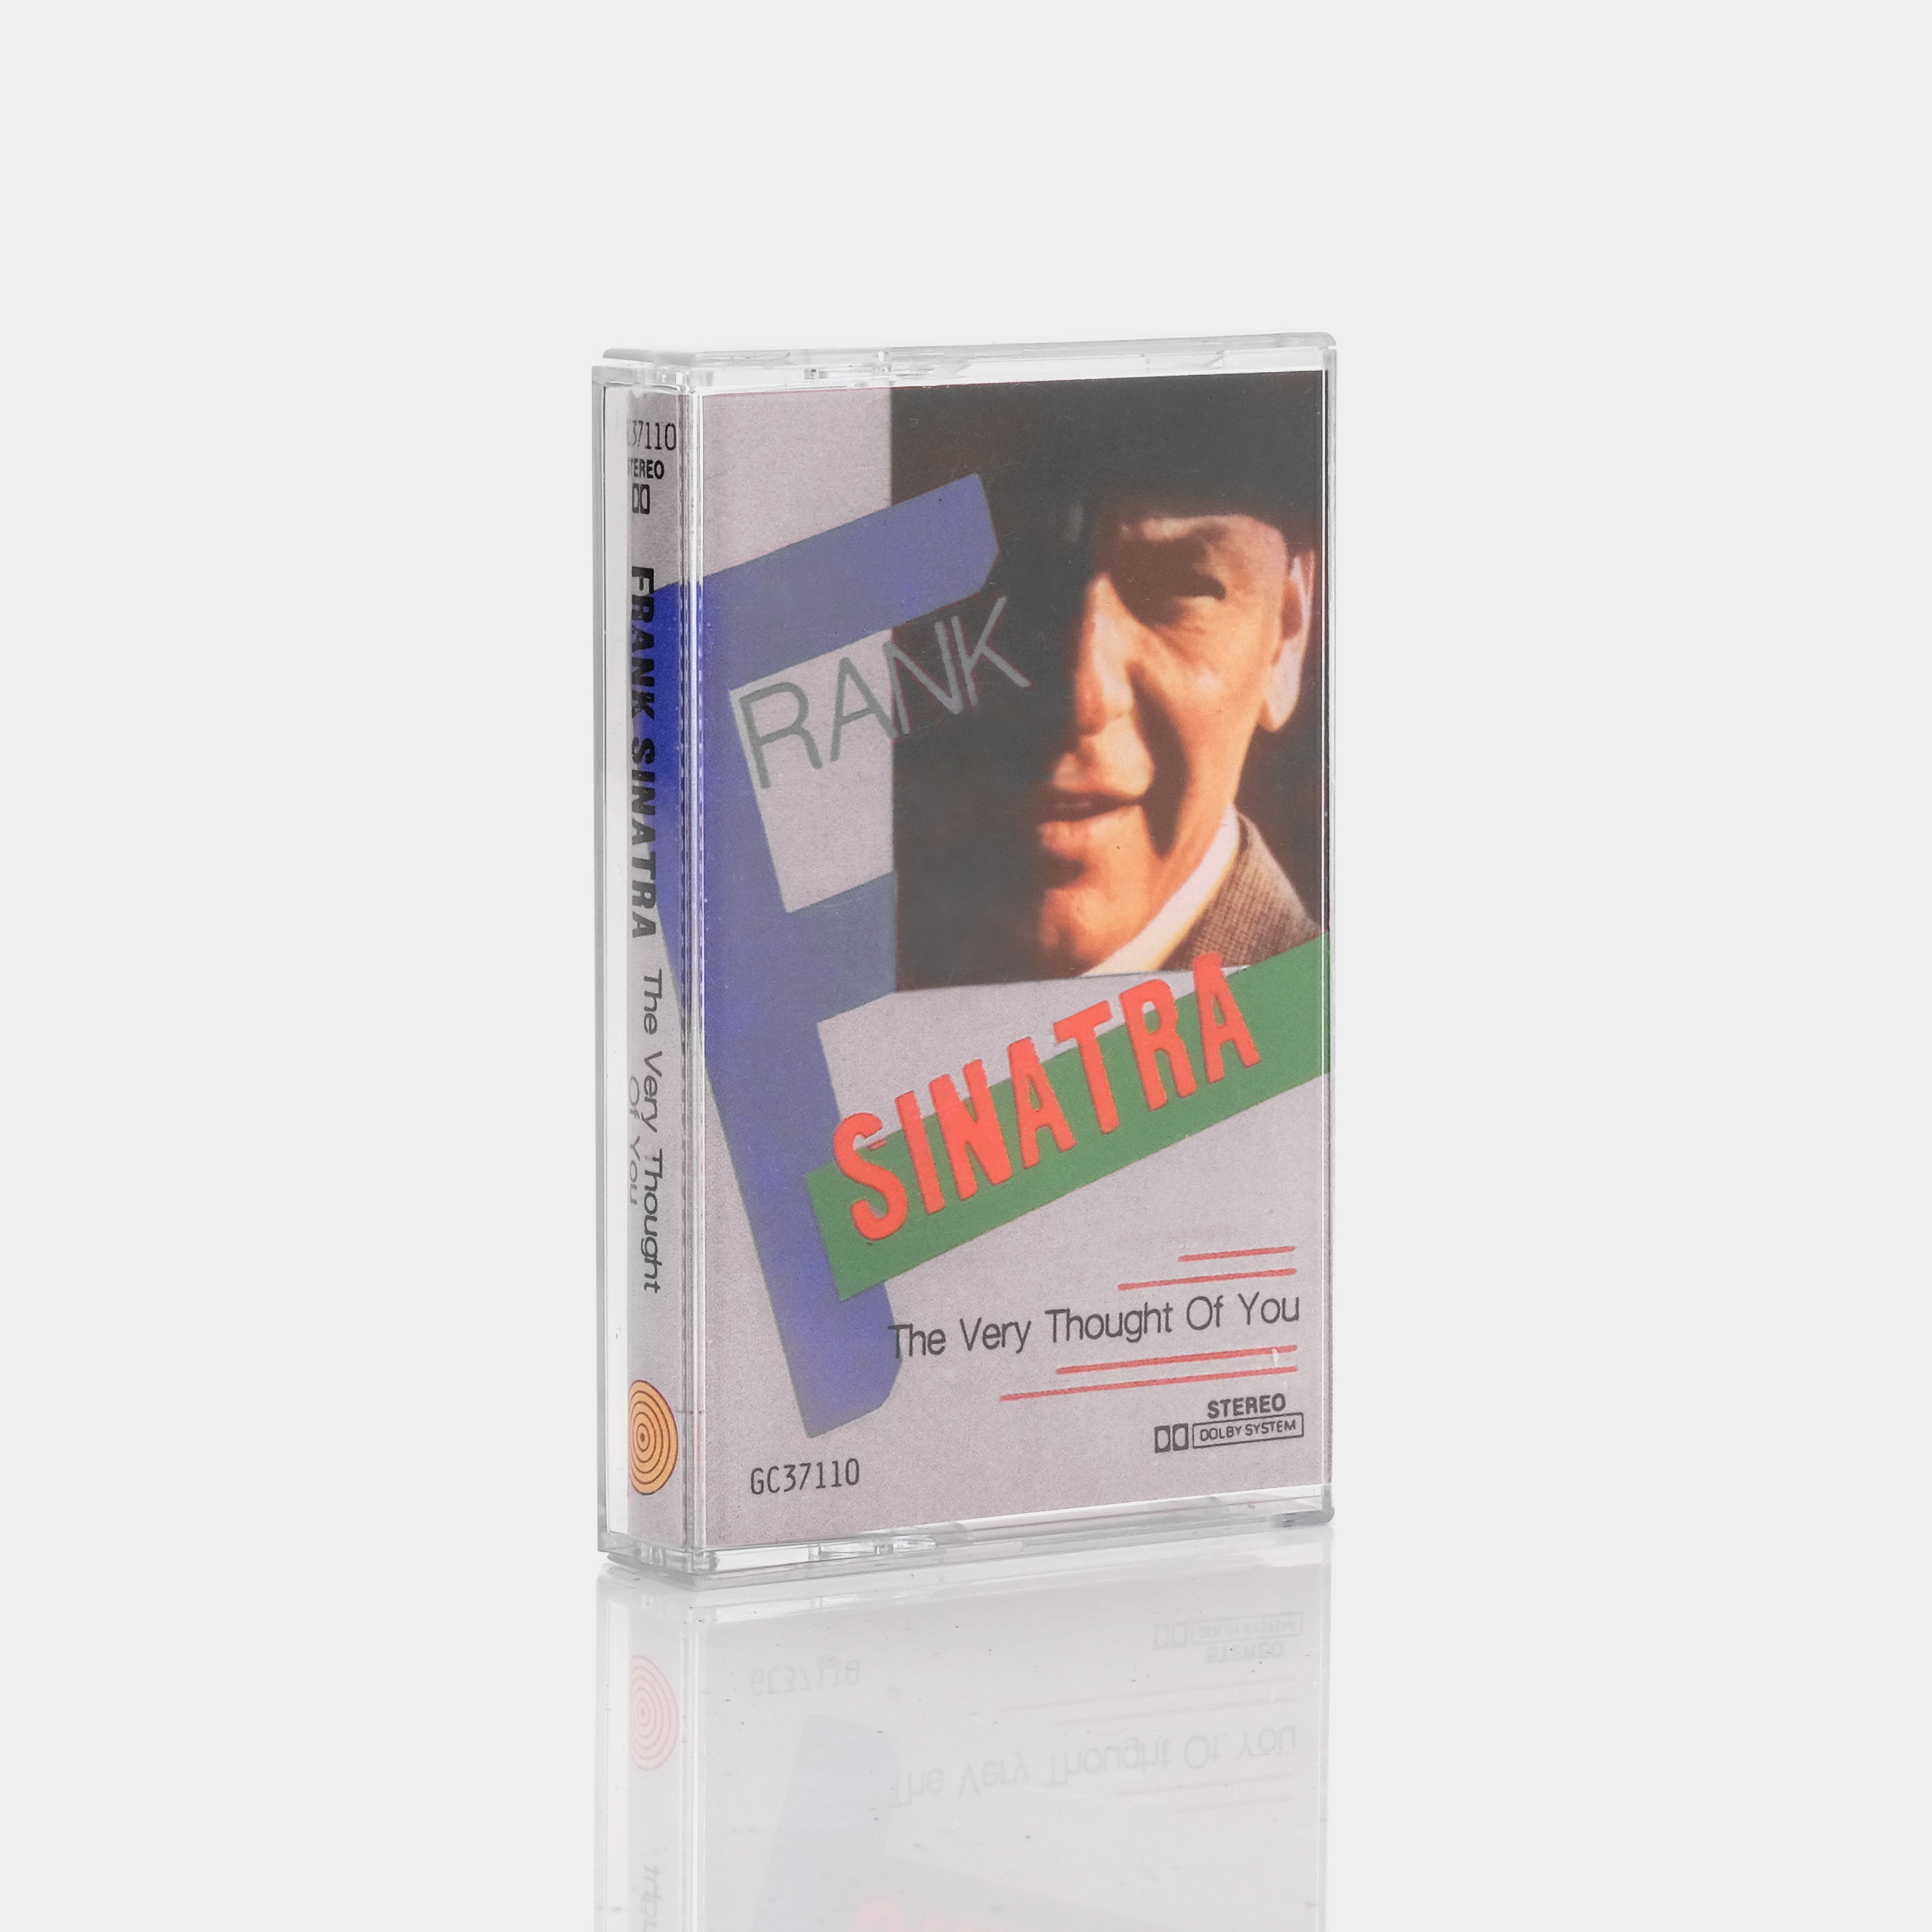 Frank Sinatra - The Very Thought Of You Cassette Tape